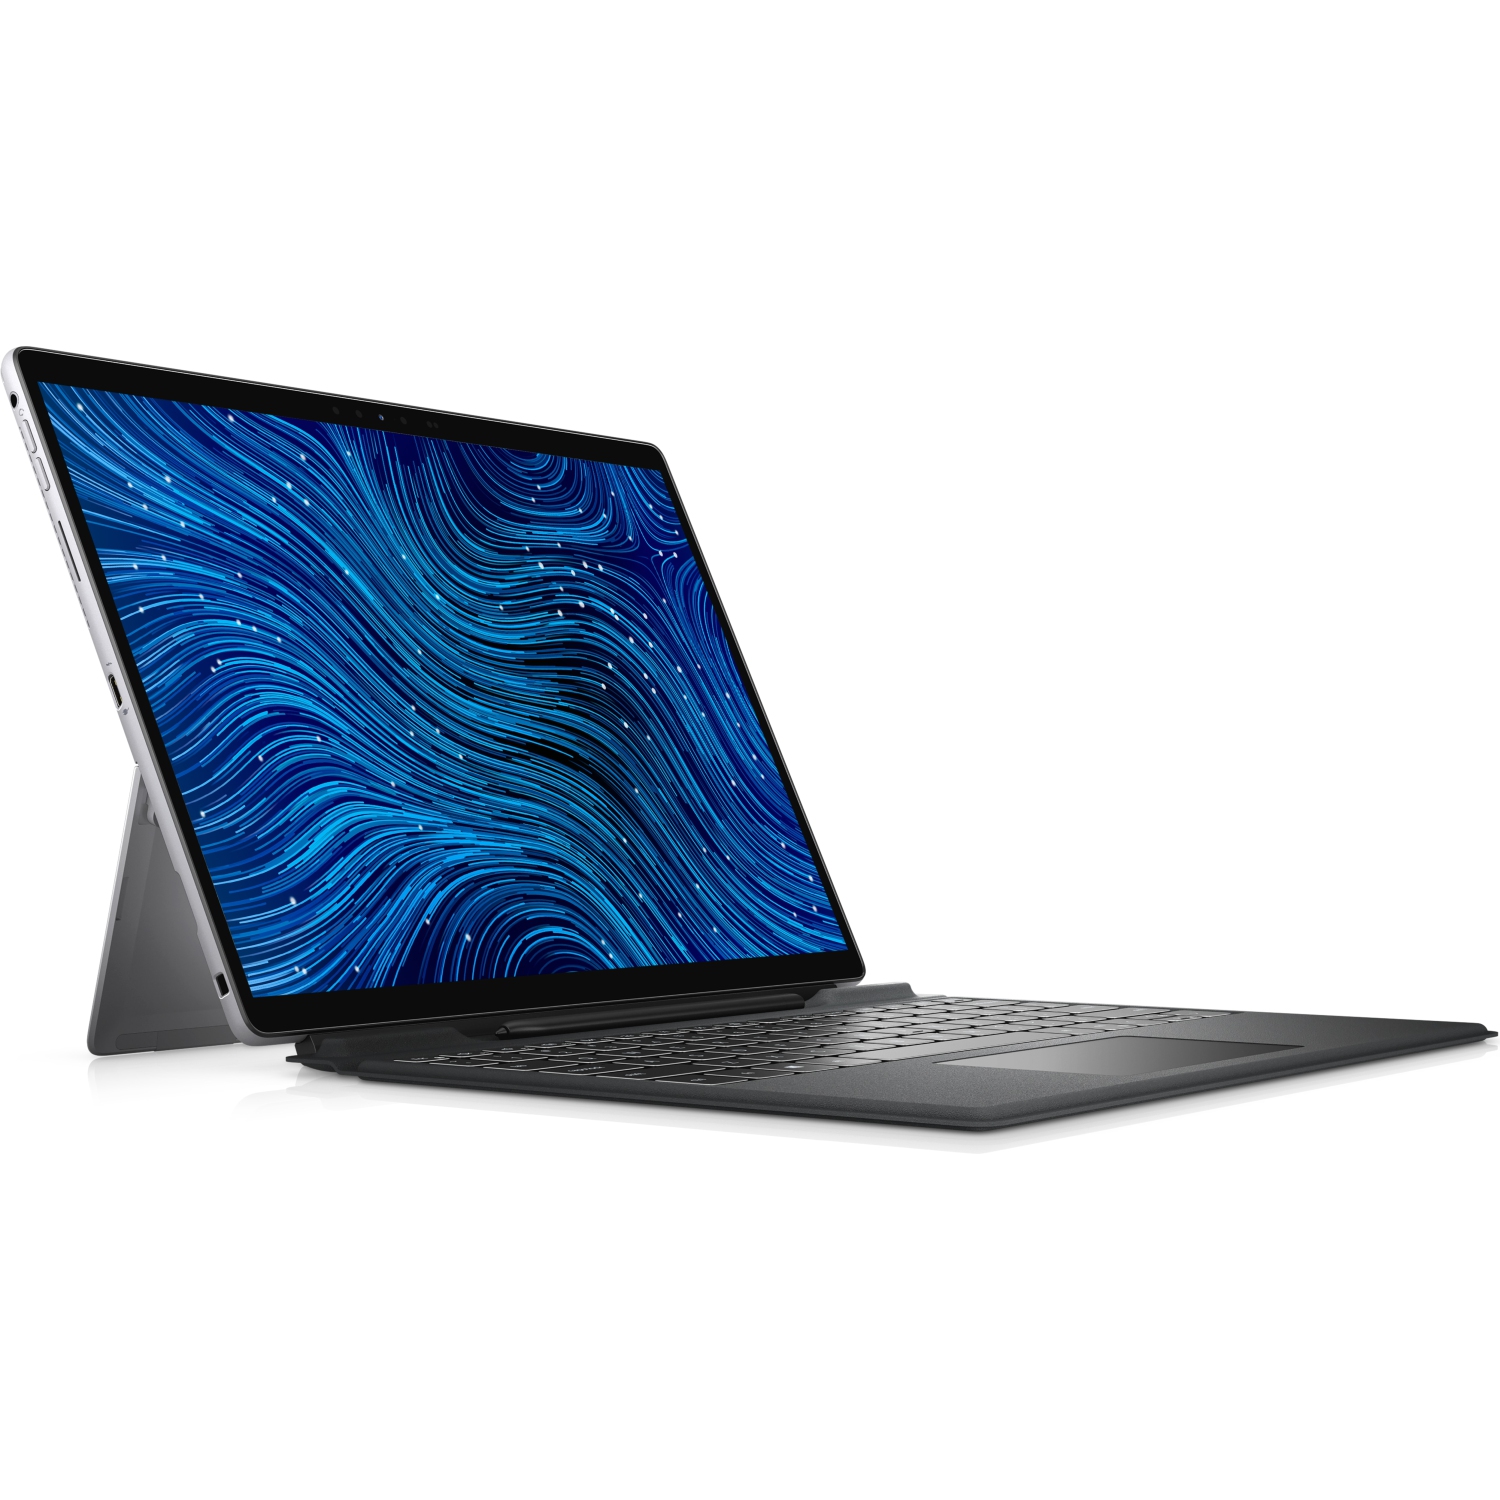 Refurbished (Excellent) – Dell Latitude 7000 7320 Detachable 2-in-1 (2021) | 13" FHD+ Touch | Core i7 - 256GB SSD - 16GB RAM | 4 Cores @ 4.6 GHz - 11th Gen CPU